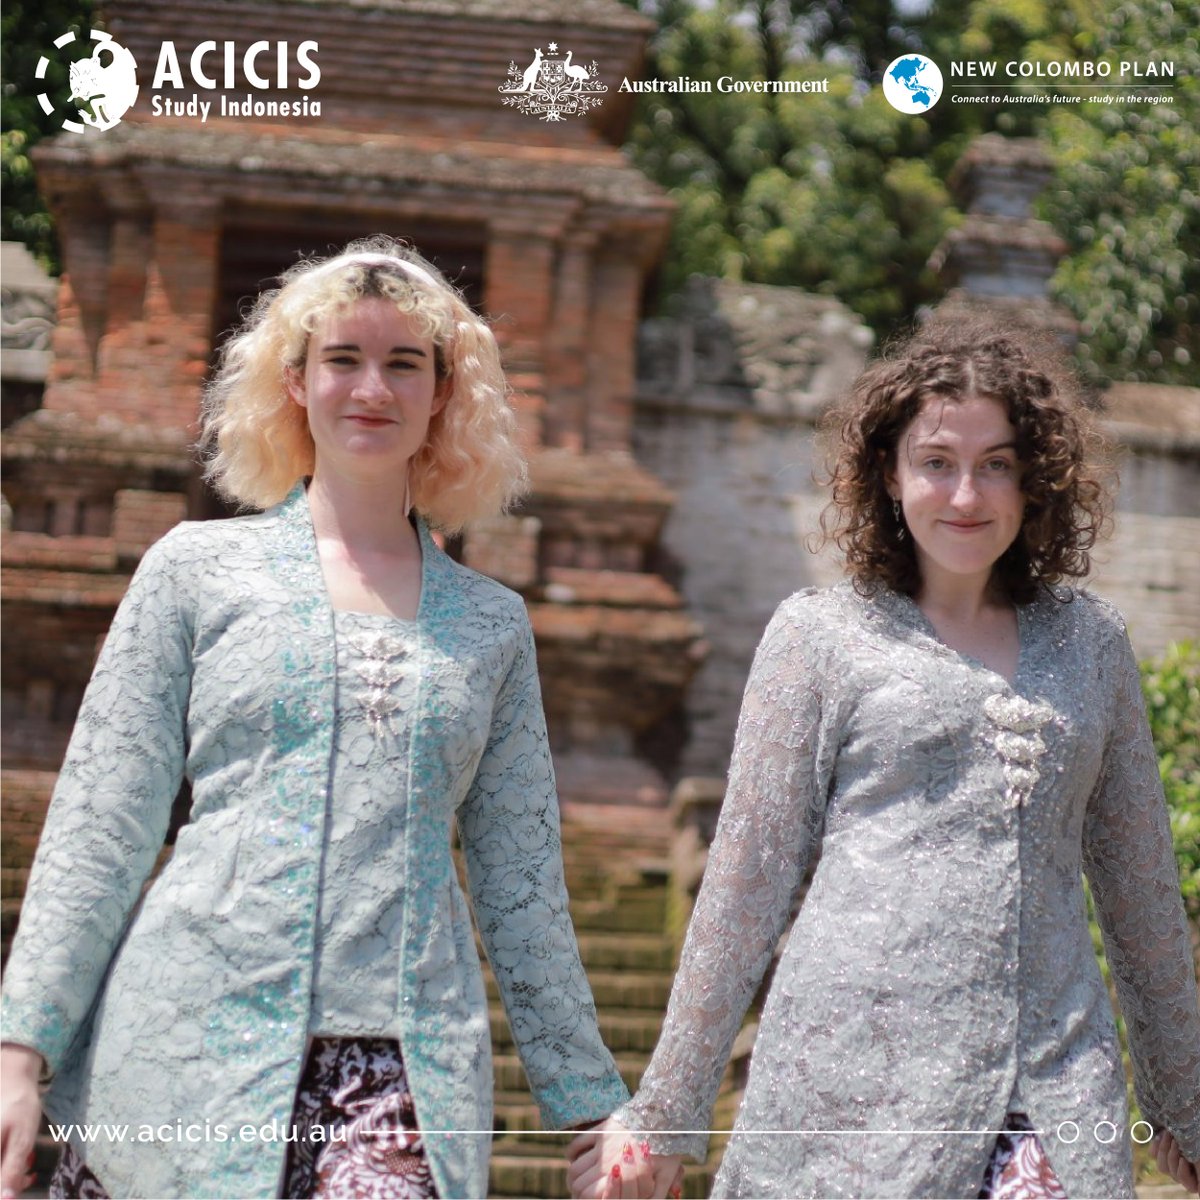 Happy Kartini Day! Celebrating Raden Ajeng Kartini, a pioneer for women's empowerment and education in Indonesia. The traditional clothes “Kebaya”, commonly worn on this special day, symbolises respect for Kartini's courage and advocacy for change ✨ #ACICIS #Kartini